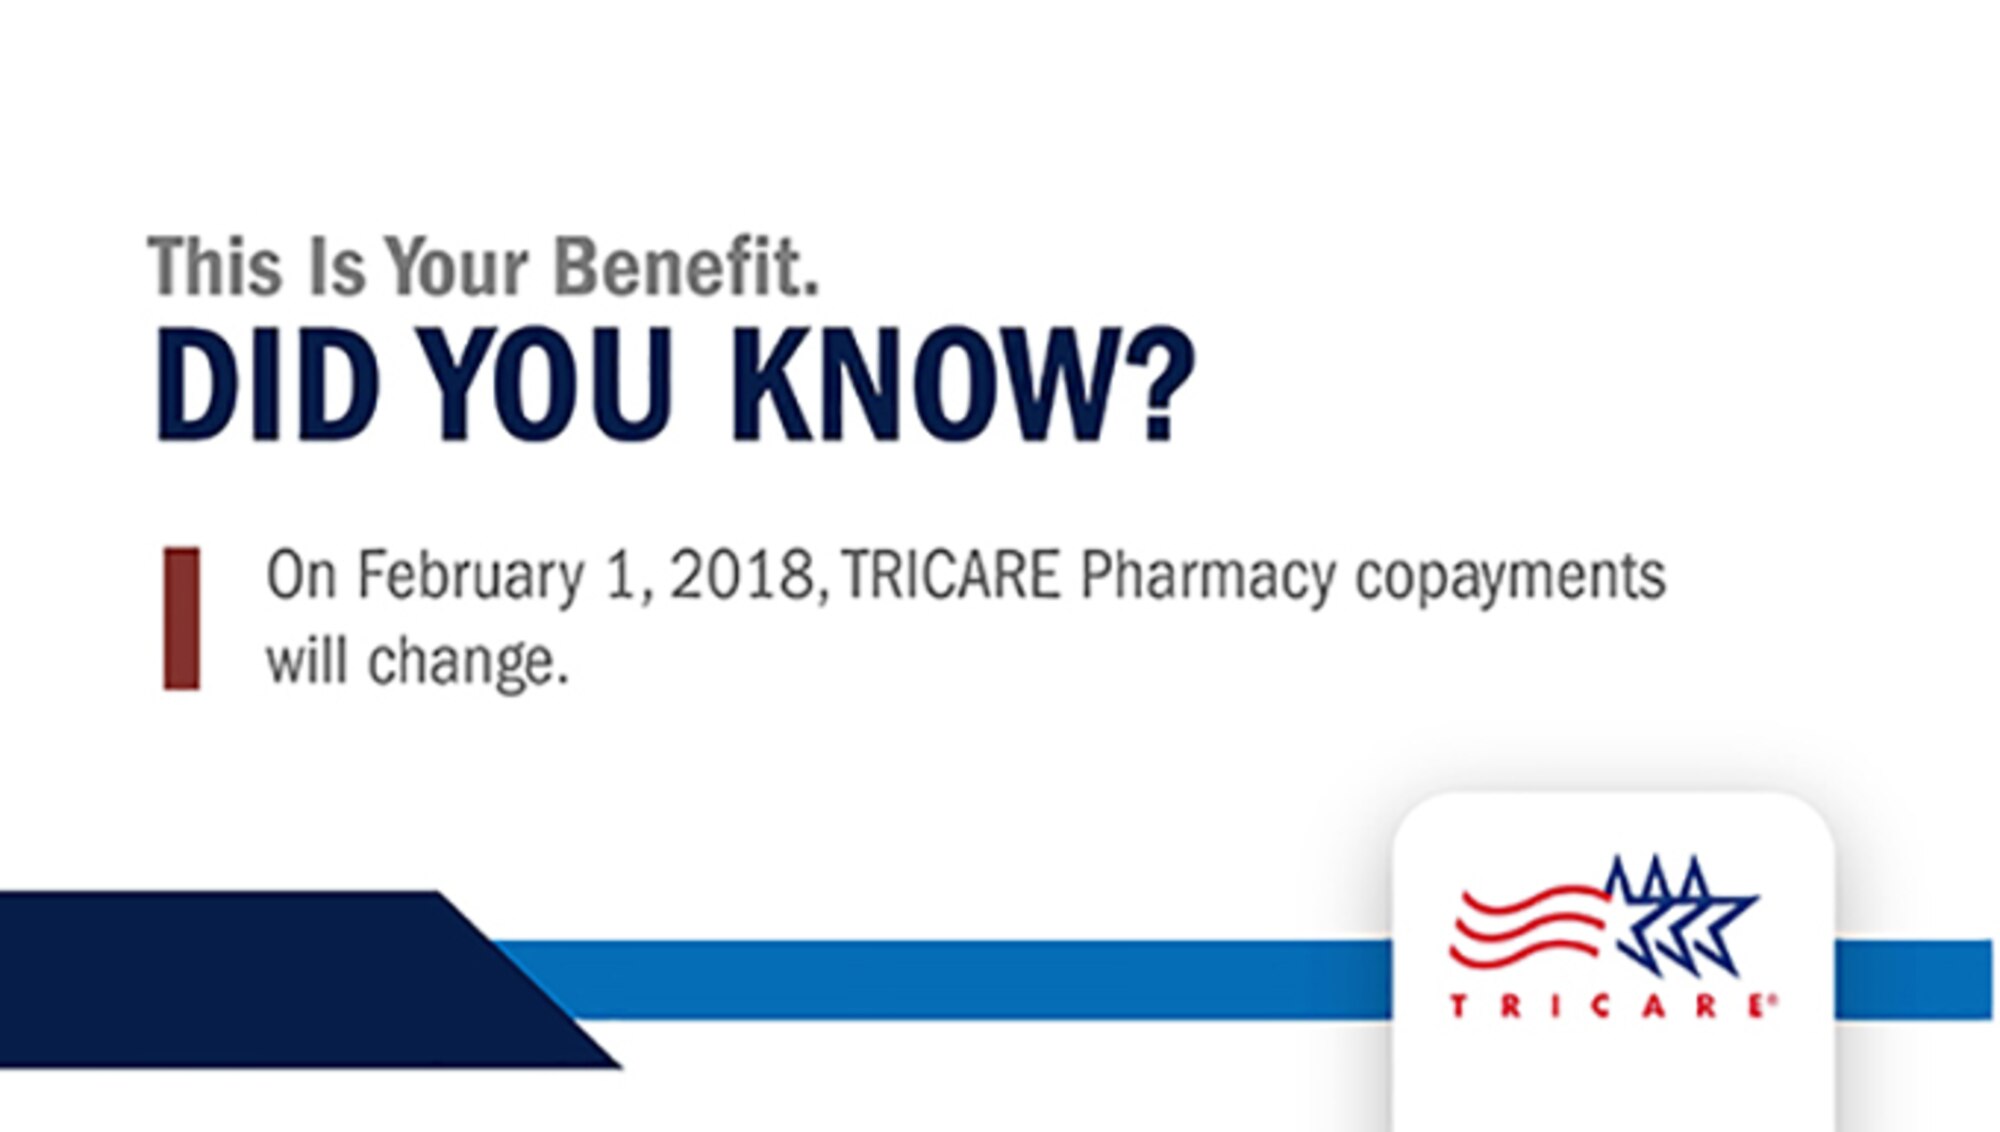 Take command: Increases to TRICARE pharmacy copayments coming Feb. 1, 2018